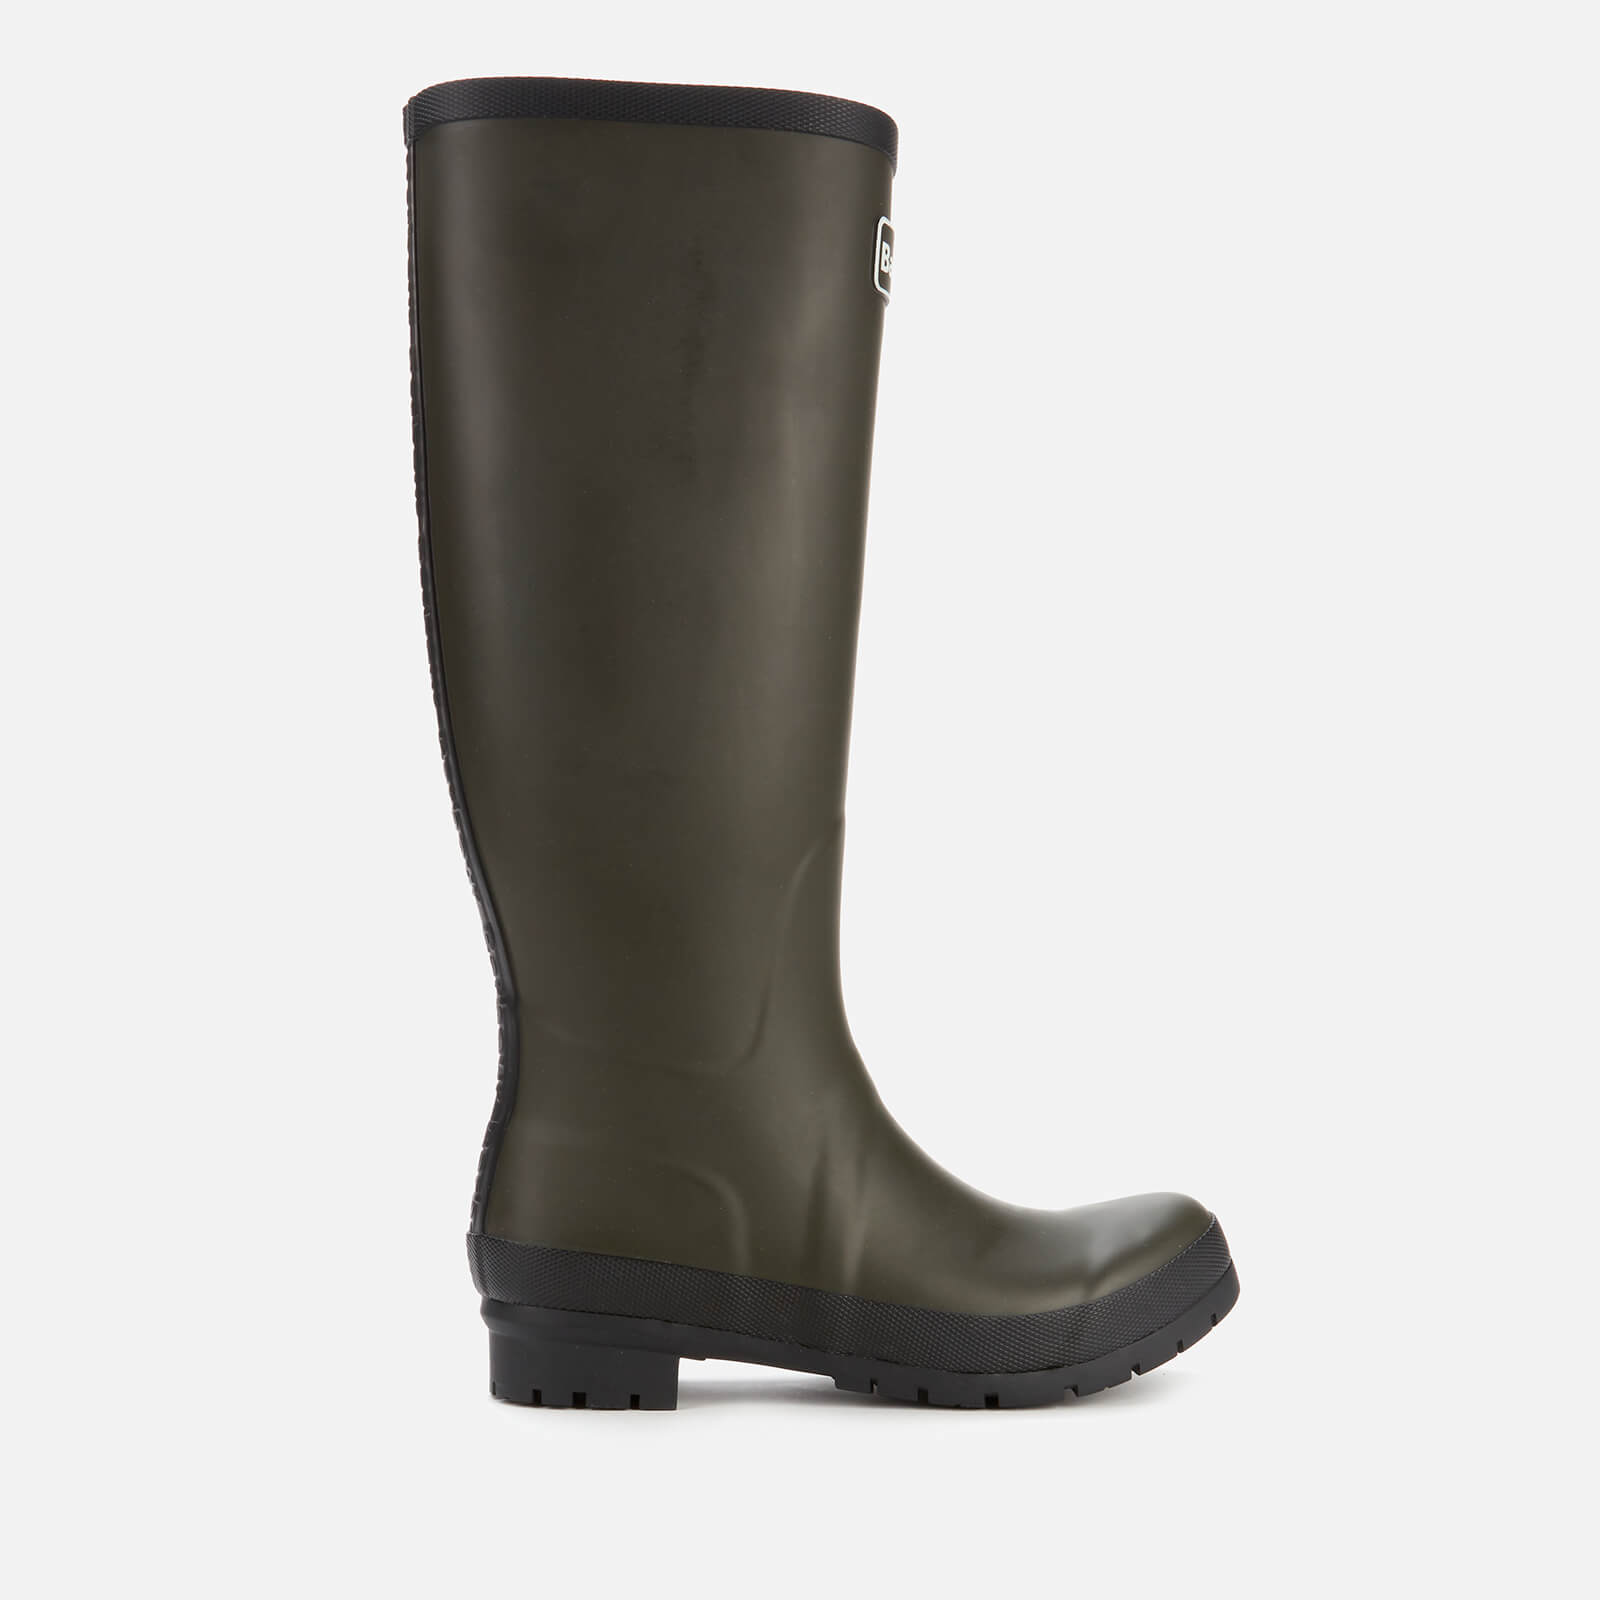 Barbour Women's Abbey Tall Wellies - Olive - UK 4